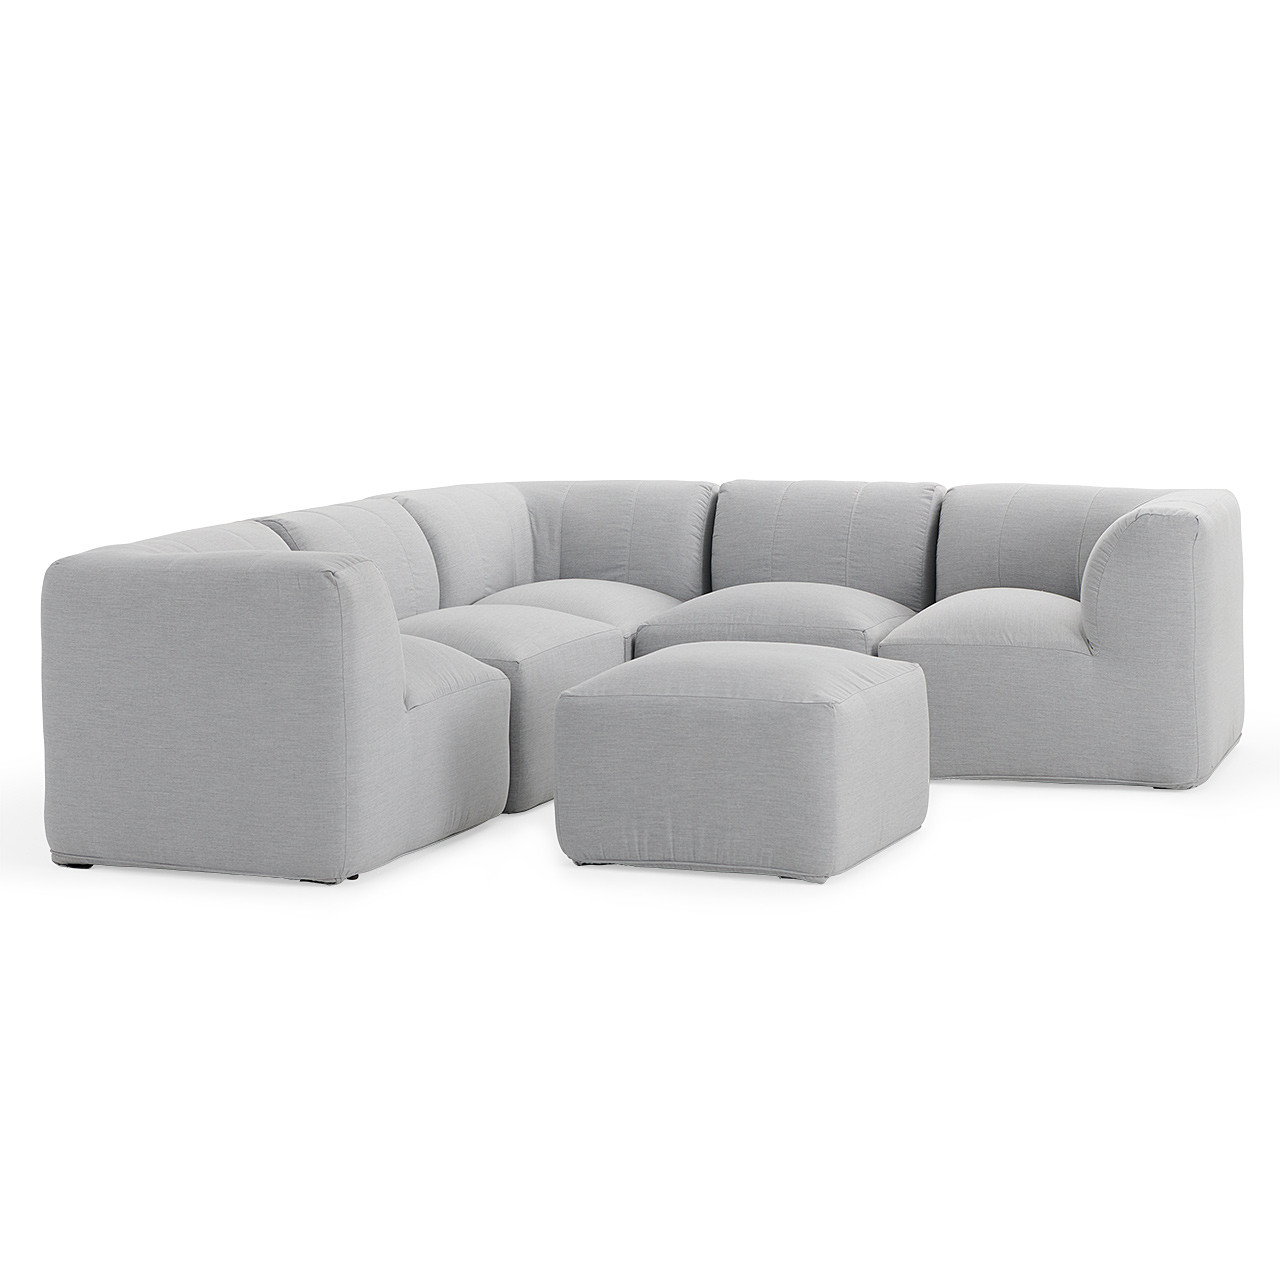 Napa Upholstered 6 Piece Sectional with Ottoman